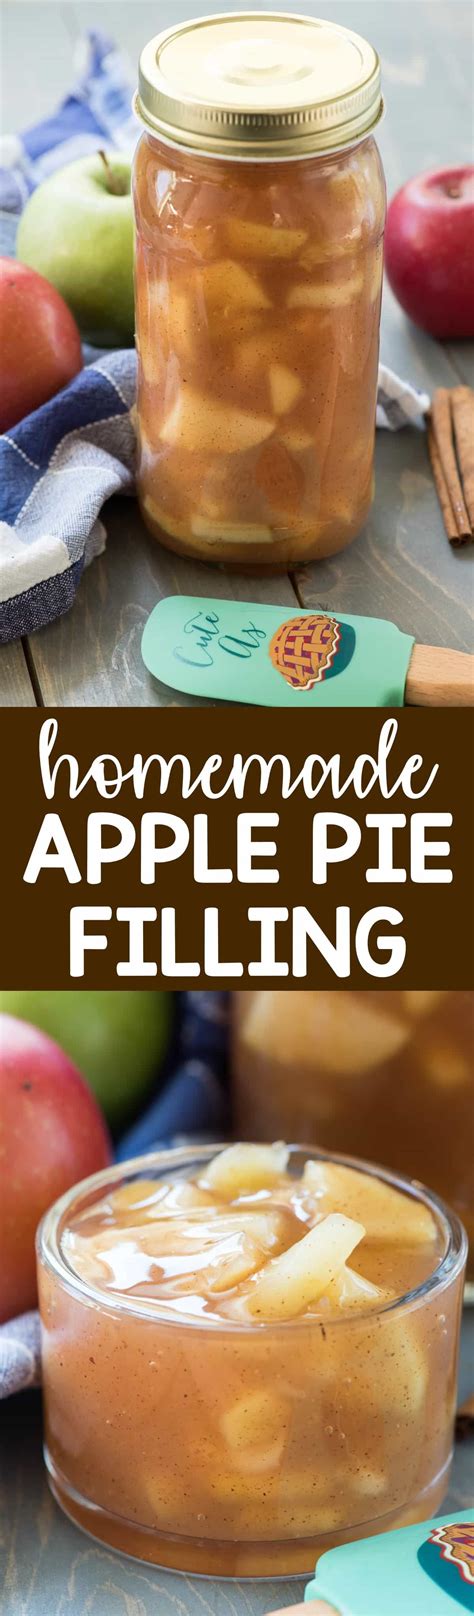 Grapes, apple pie filling, granny smith apple, blueberries, red delicious apple and 1 more. Homemade Apple Pie Filling - Crazy for Crust | Recipe ...